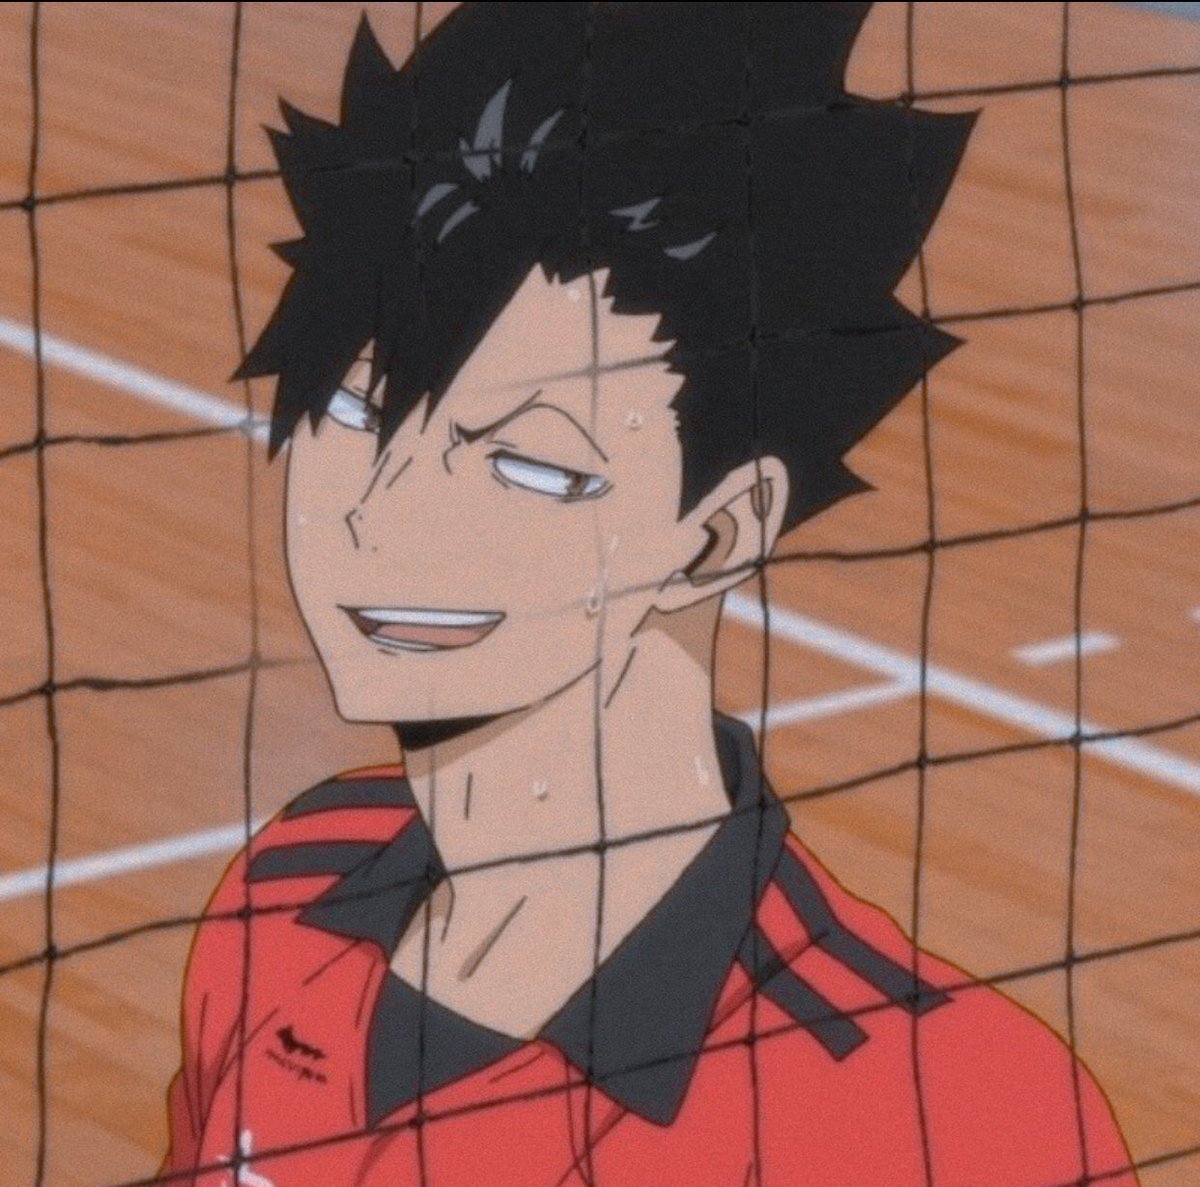 kuroo stans:-loud when it comes to kuroo-intelligent-tall-takes initiative even if ur kinda shy-thinks furudate hates him-good music taste-desperately waiting for karasuno vs nekoma to be animated-VERY h word like omg pls calm down i can feel that energy from here